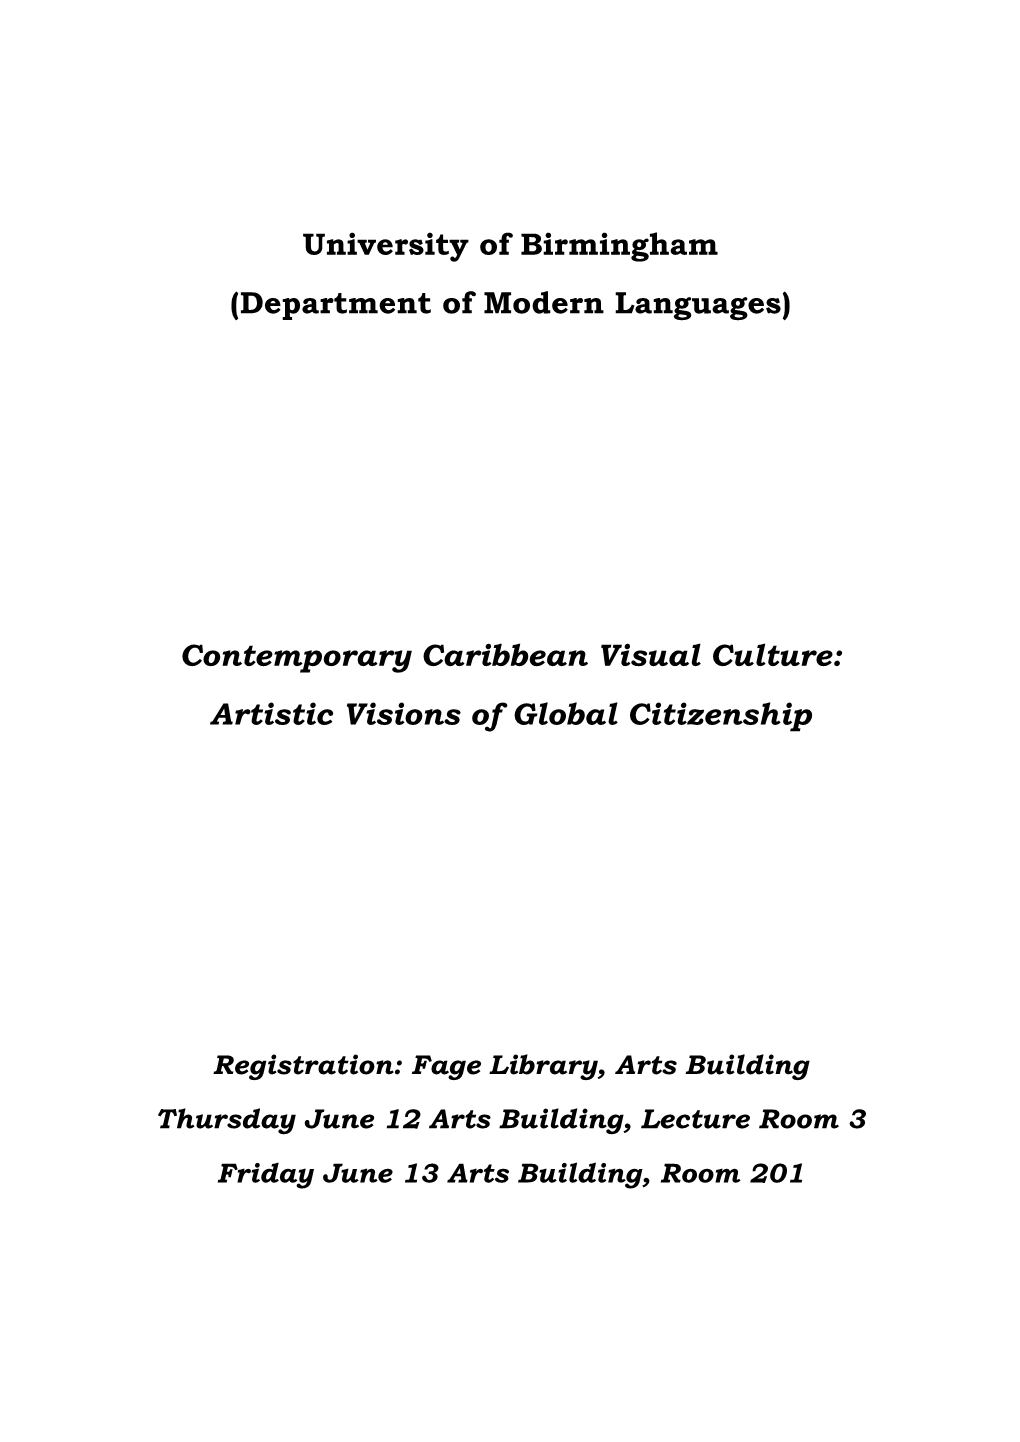 Contemporary Caribbean Visual Culture: Artistic Visions of Global Citizenship